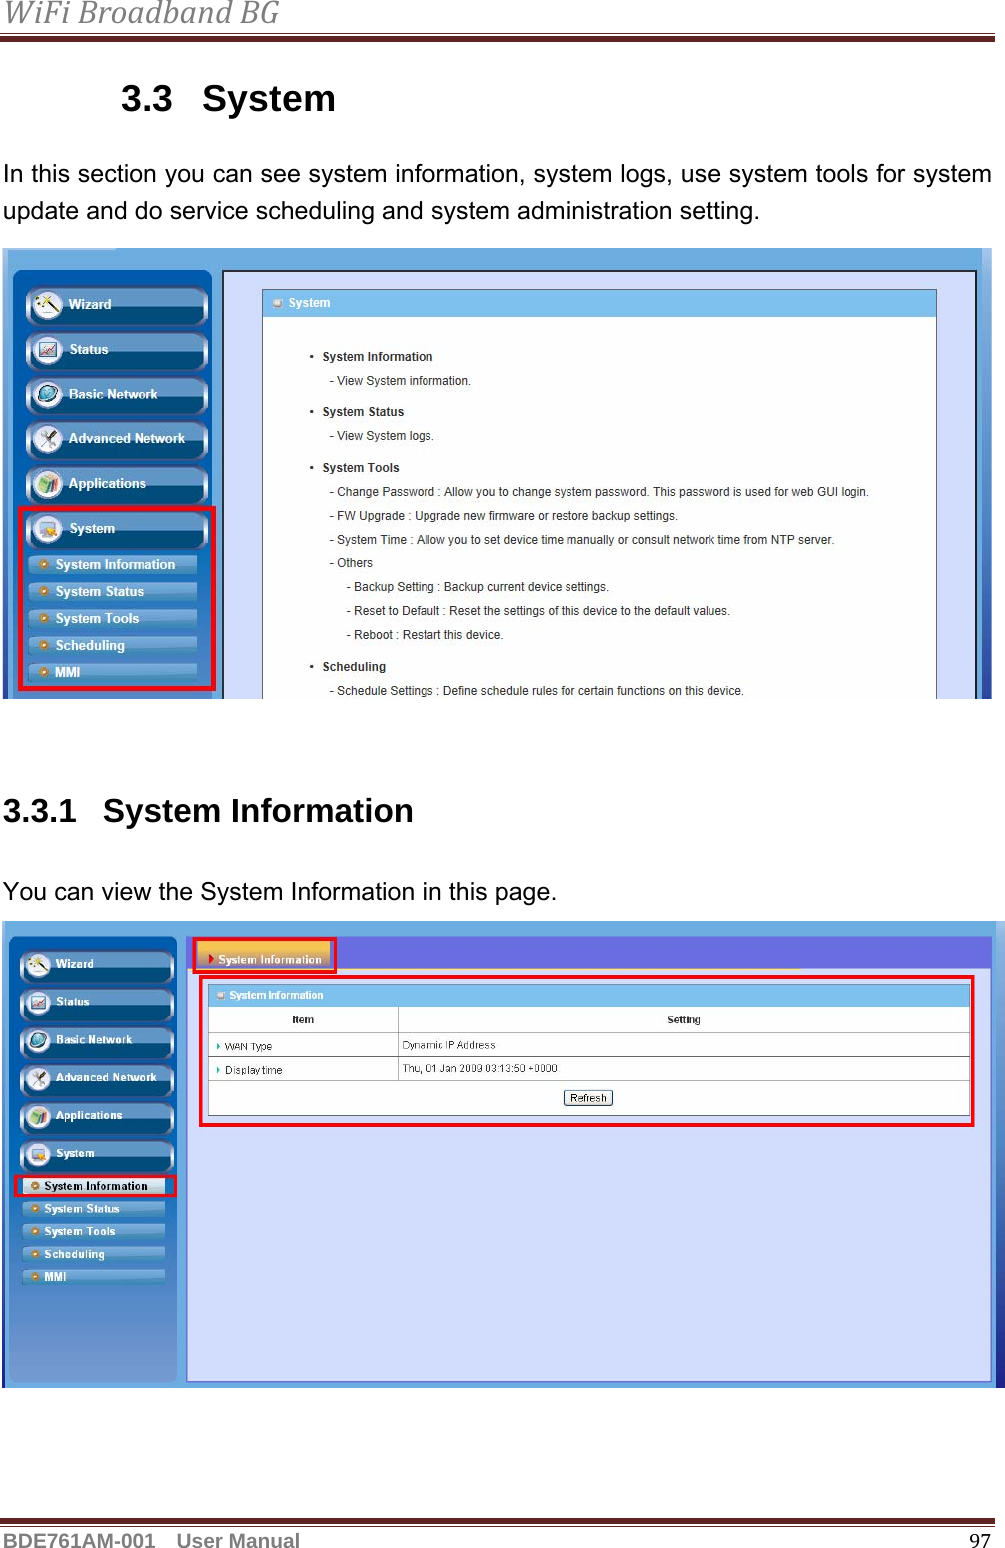 WiFiBroadbandBGBDE761AM-001  User Manual   973.3 System In this section you can see system information, system logs, use system tools for system update and do service scheduling and system administration setting.   3.3.1 System Information You can view the System Information in this page.   